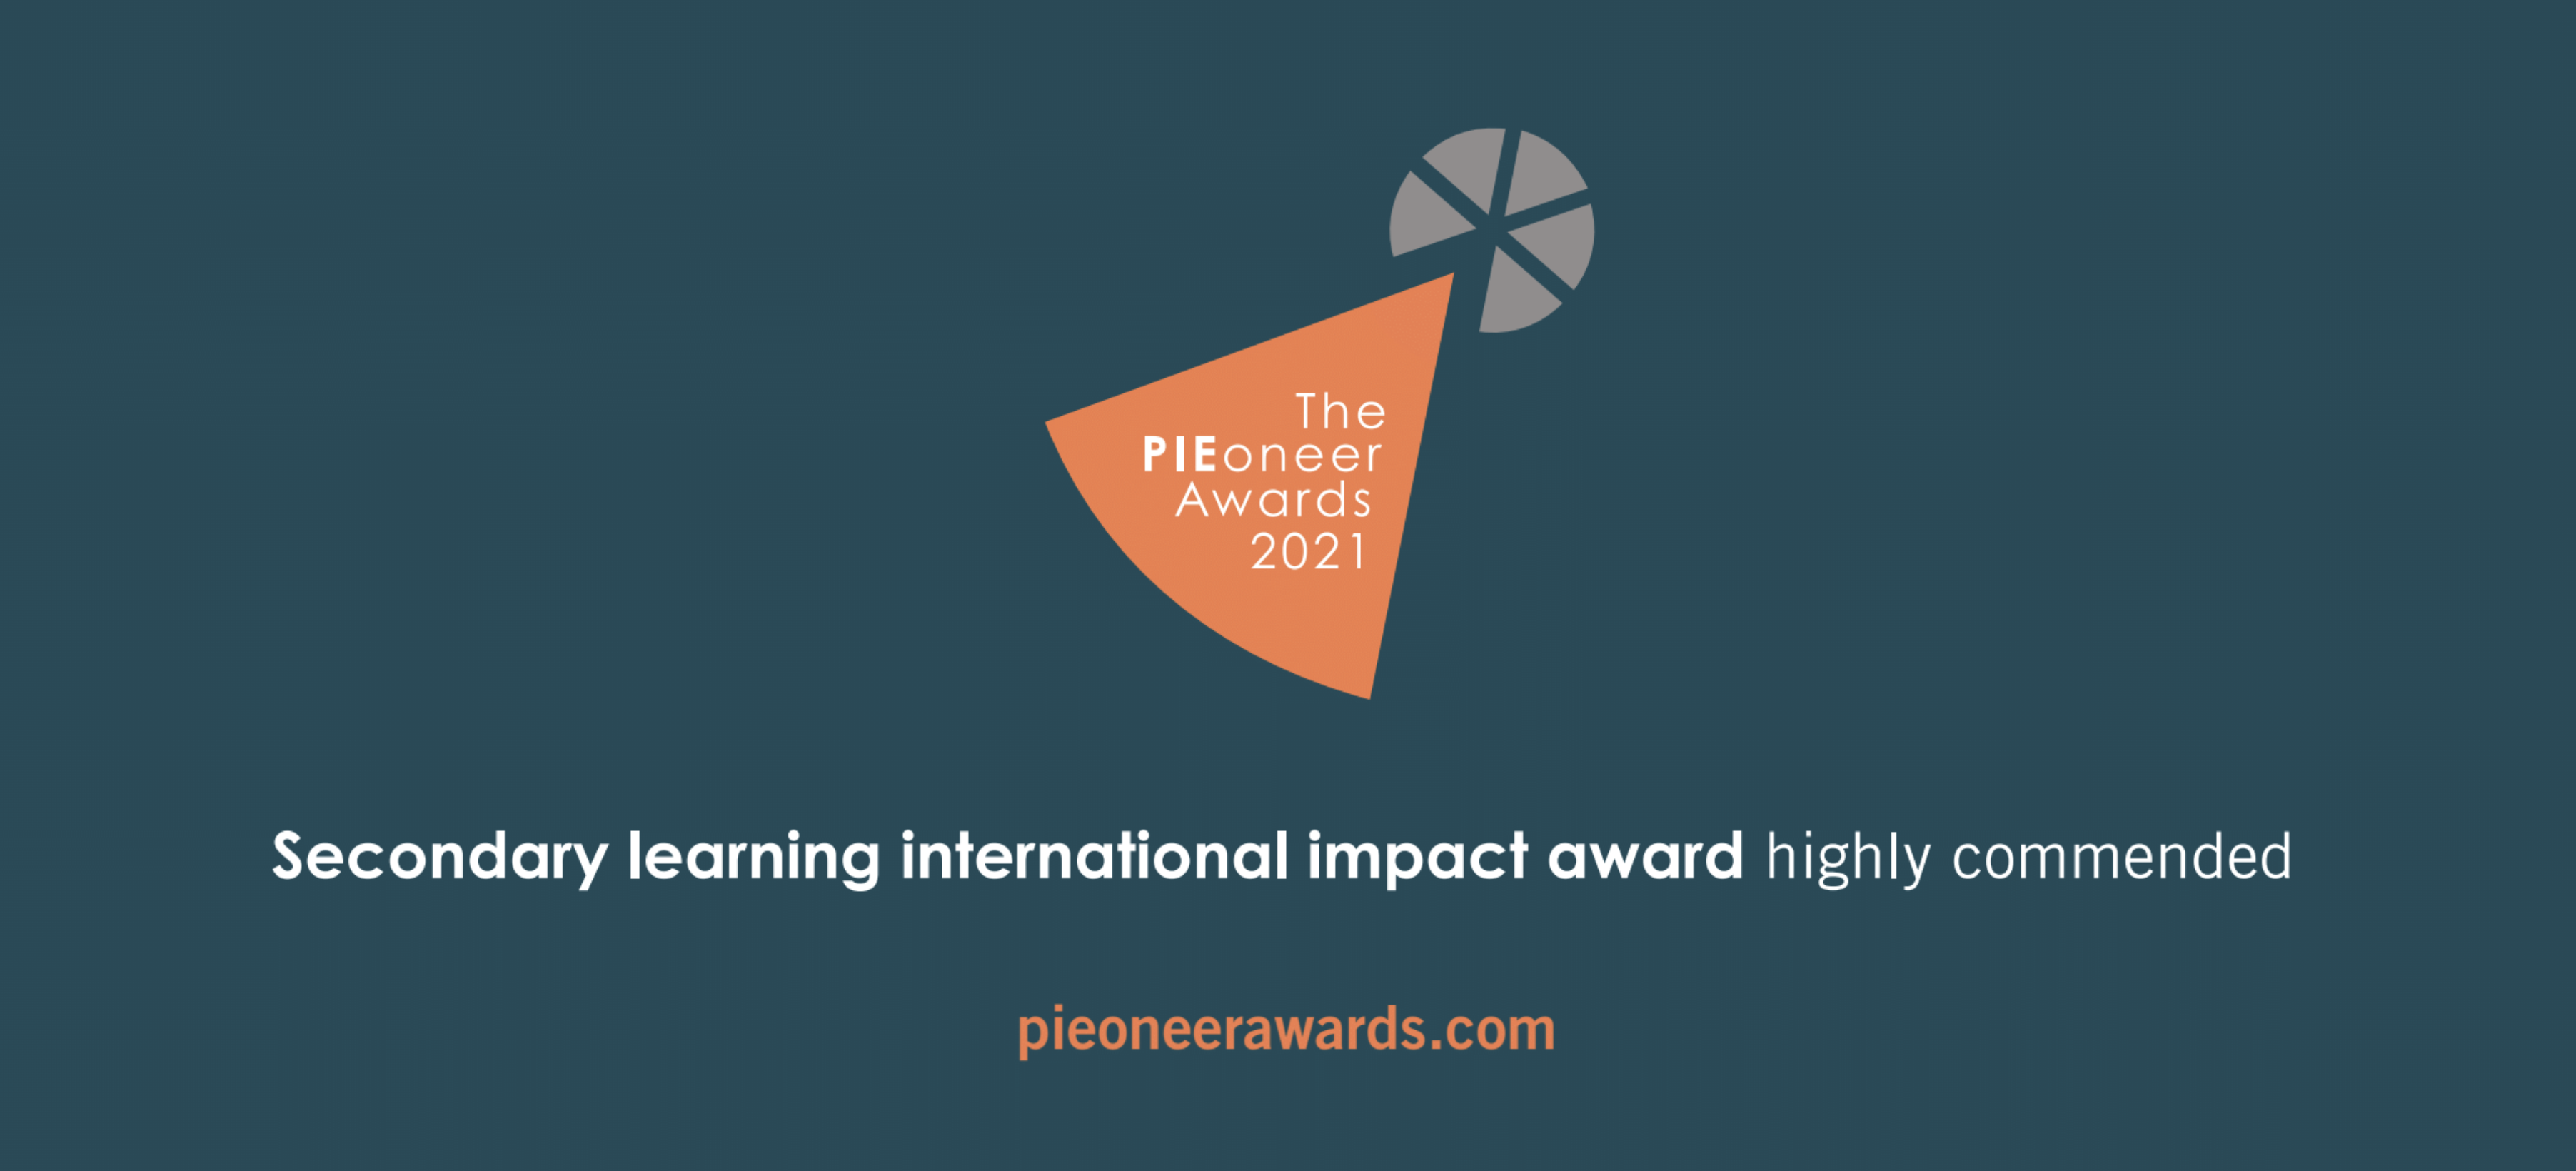 The PIE - Secondary Learning International Impact Award